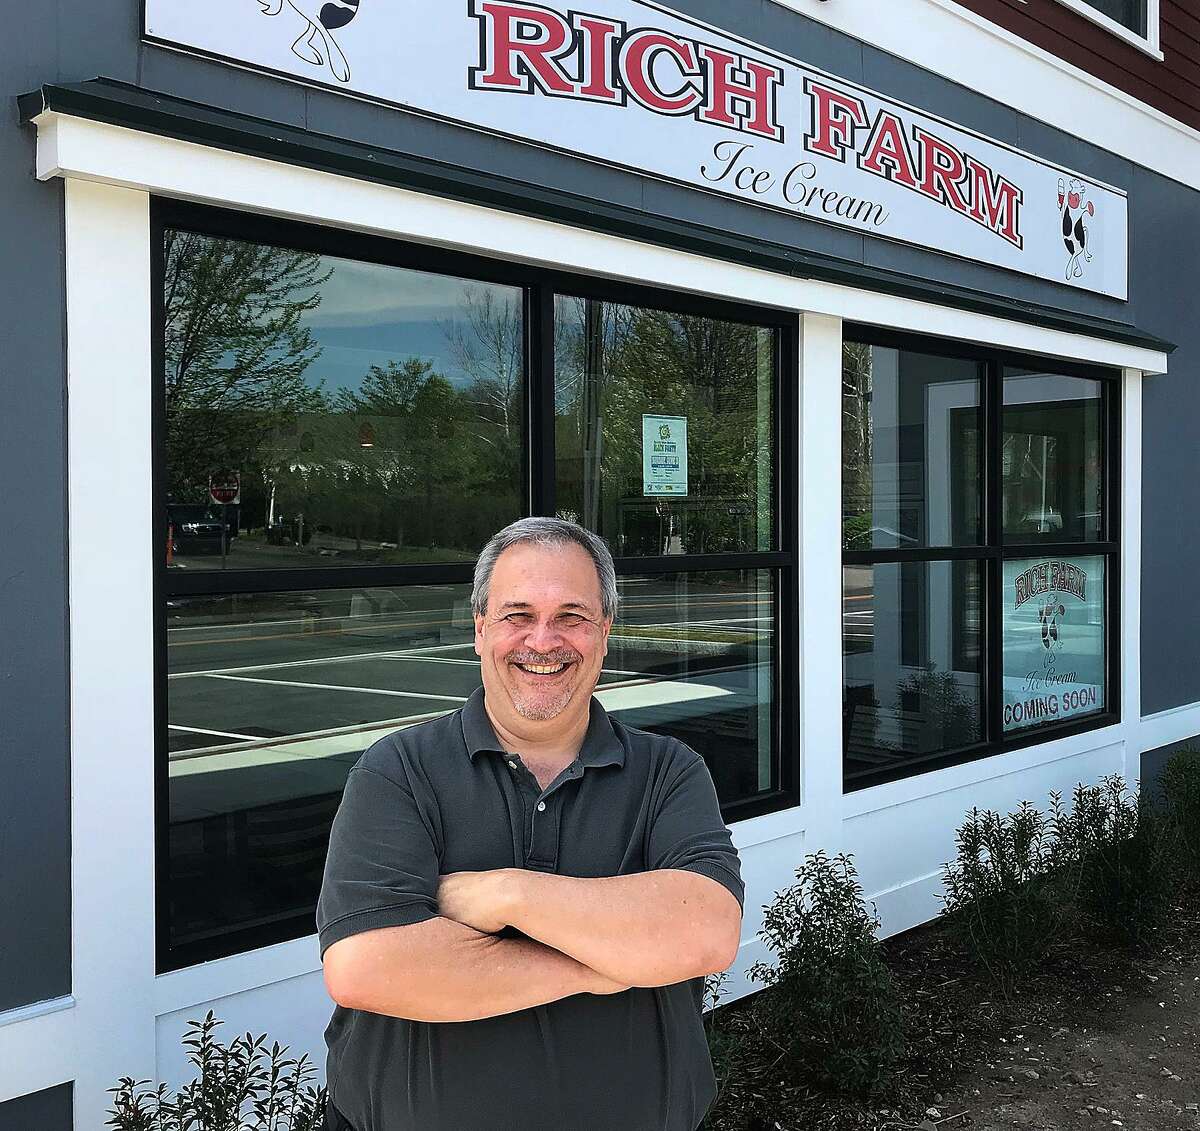 Mark DePaolis, franchise owner, stands in front of his Rich Farm Ice Cream store in Brookfield Village in Brookfield, Conn., on Monday, May 7, 2018. DePaolis will open the stand on Monday, May 14.